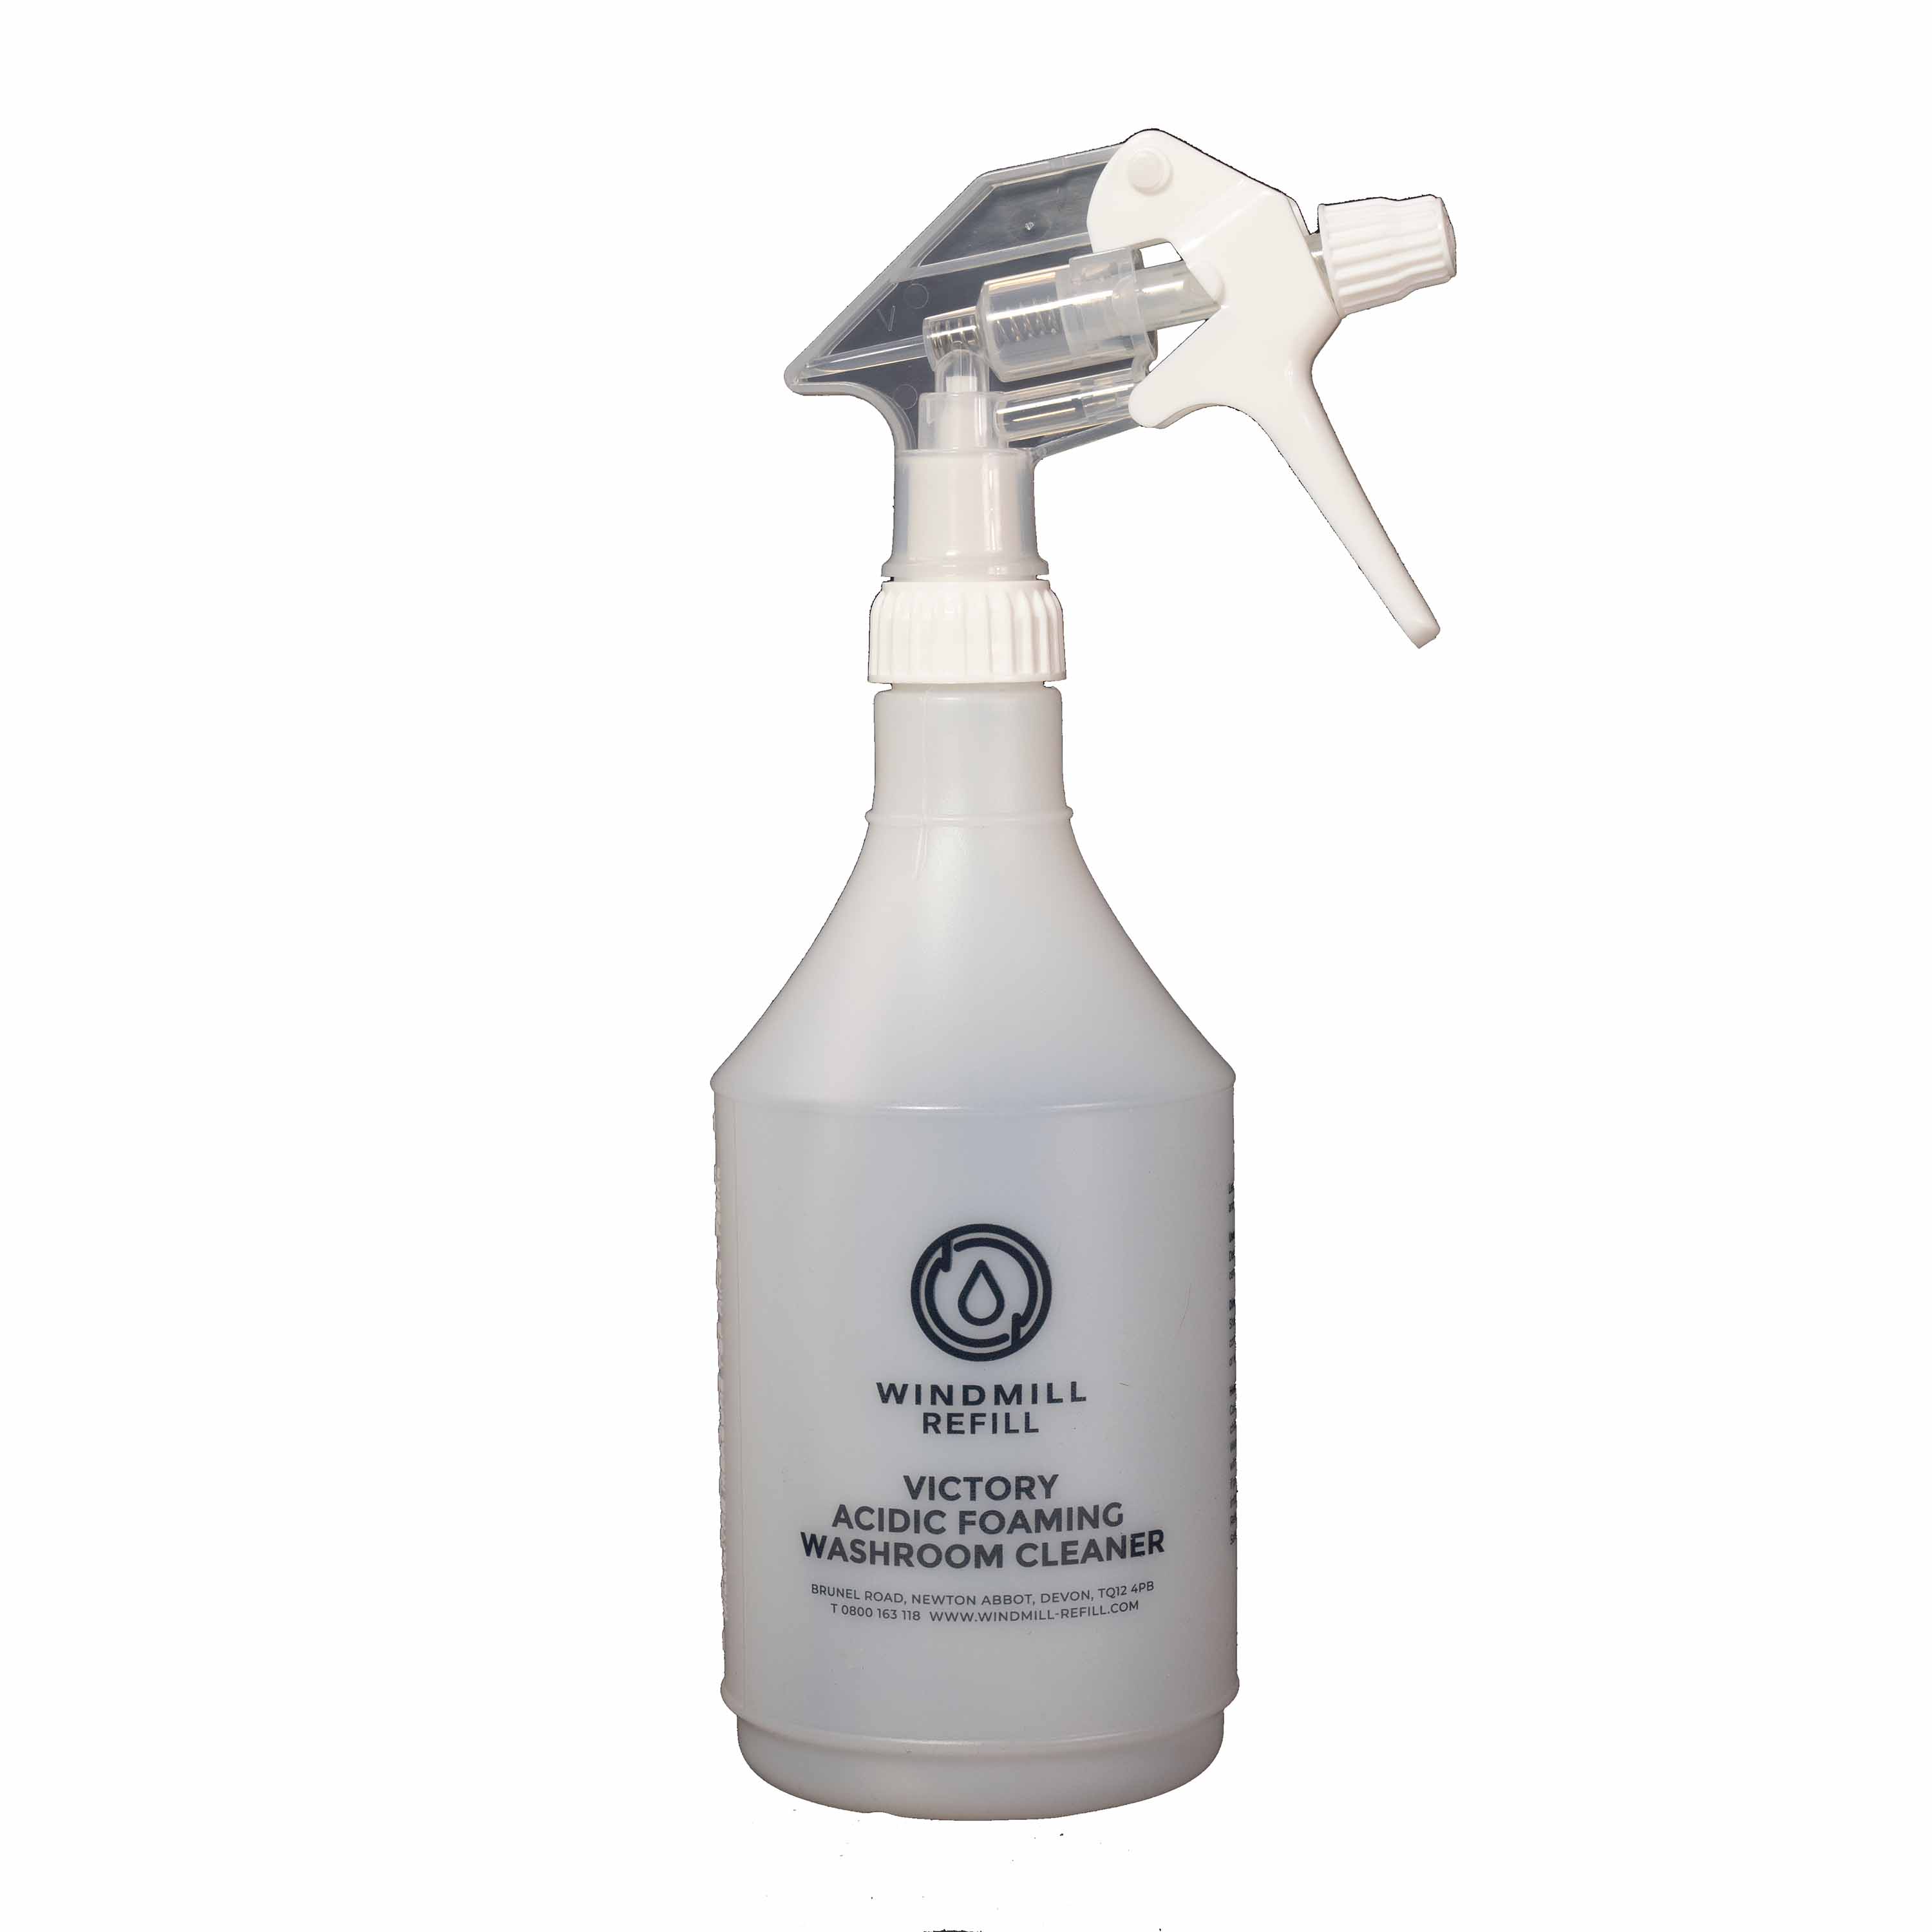 Windmill Victory 750ml Trigger Spray Complete with White Foaming Trigger Head and Label